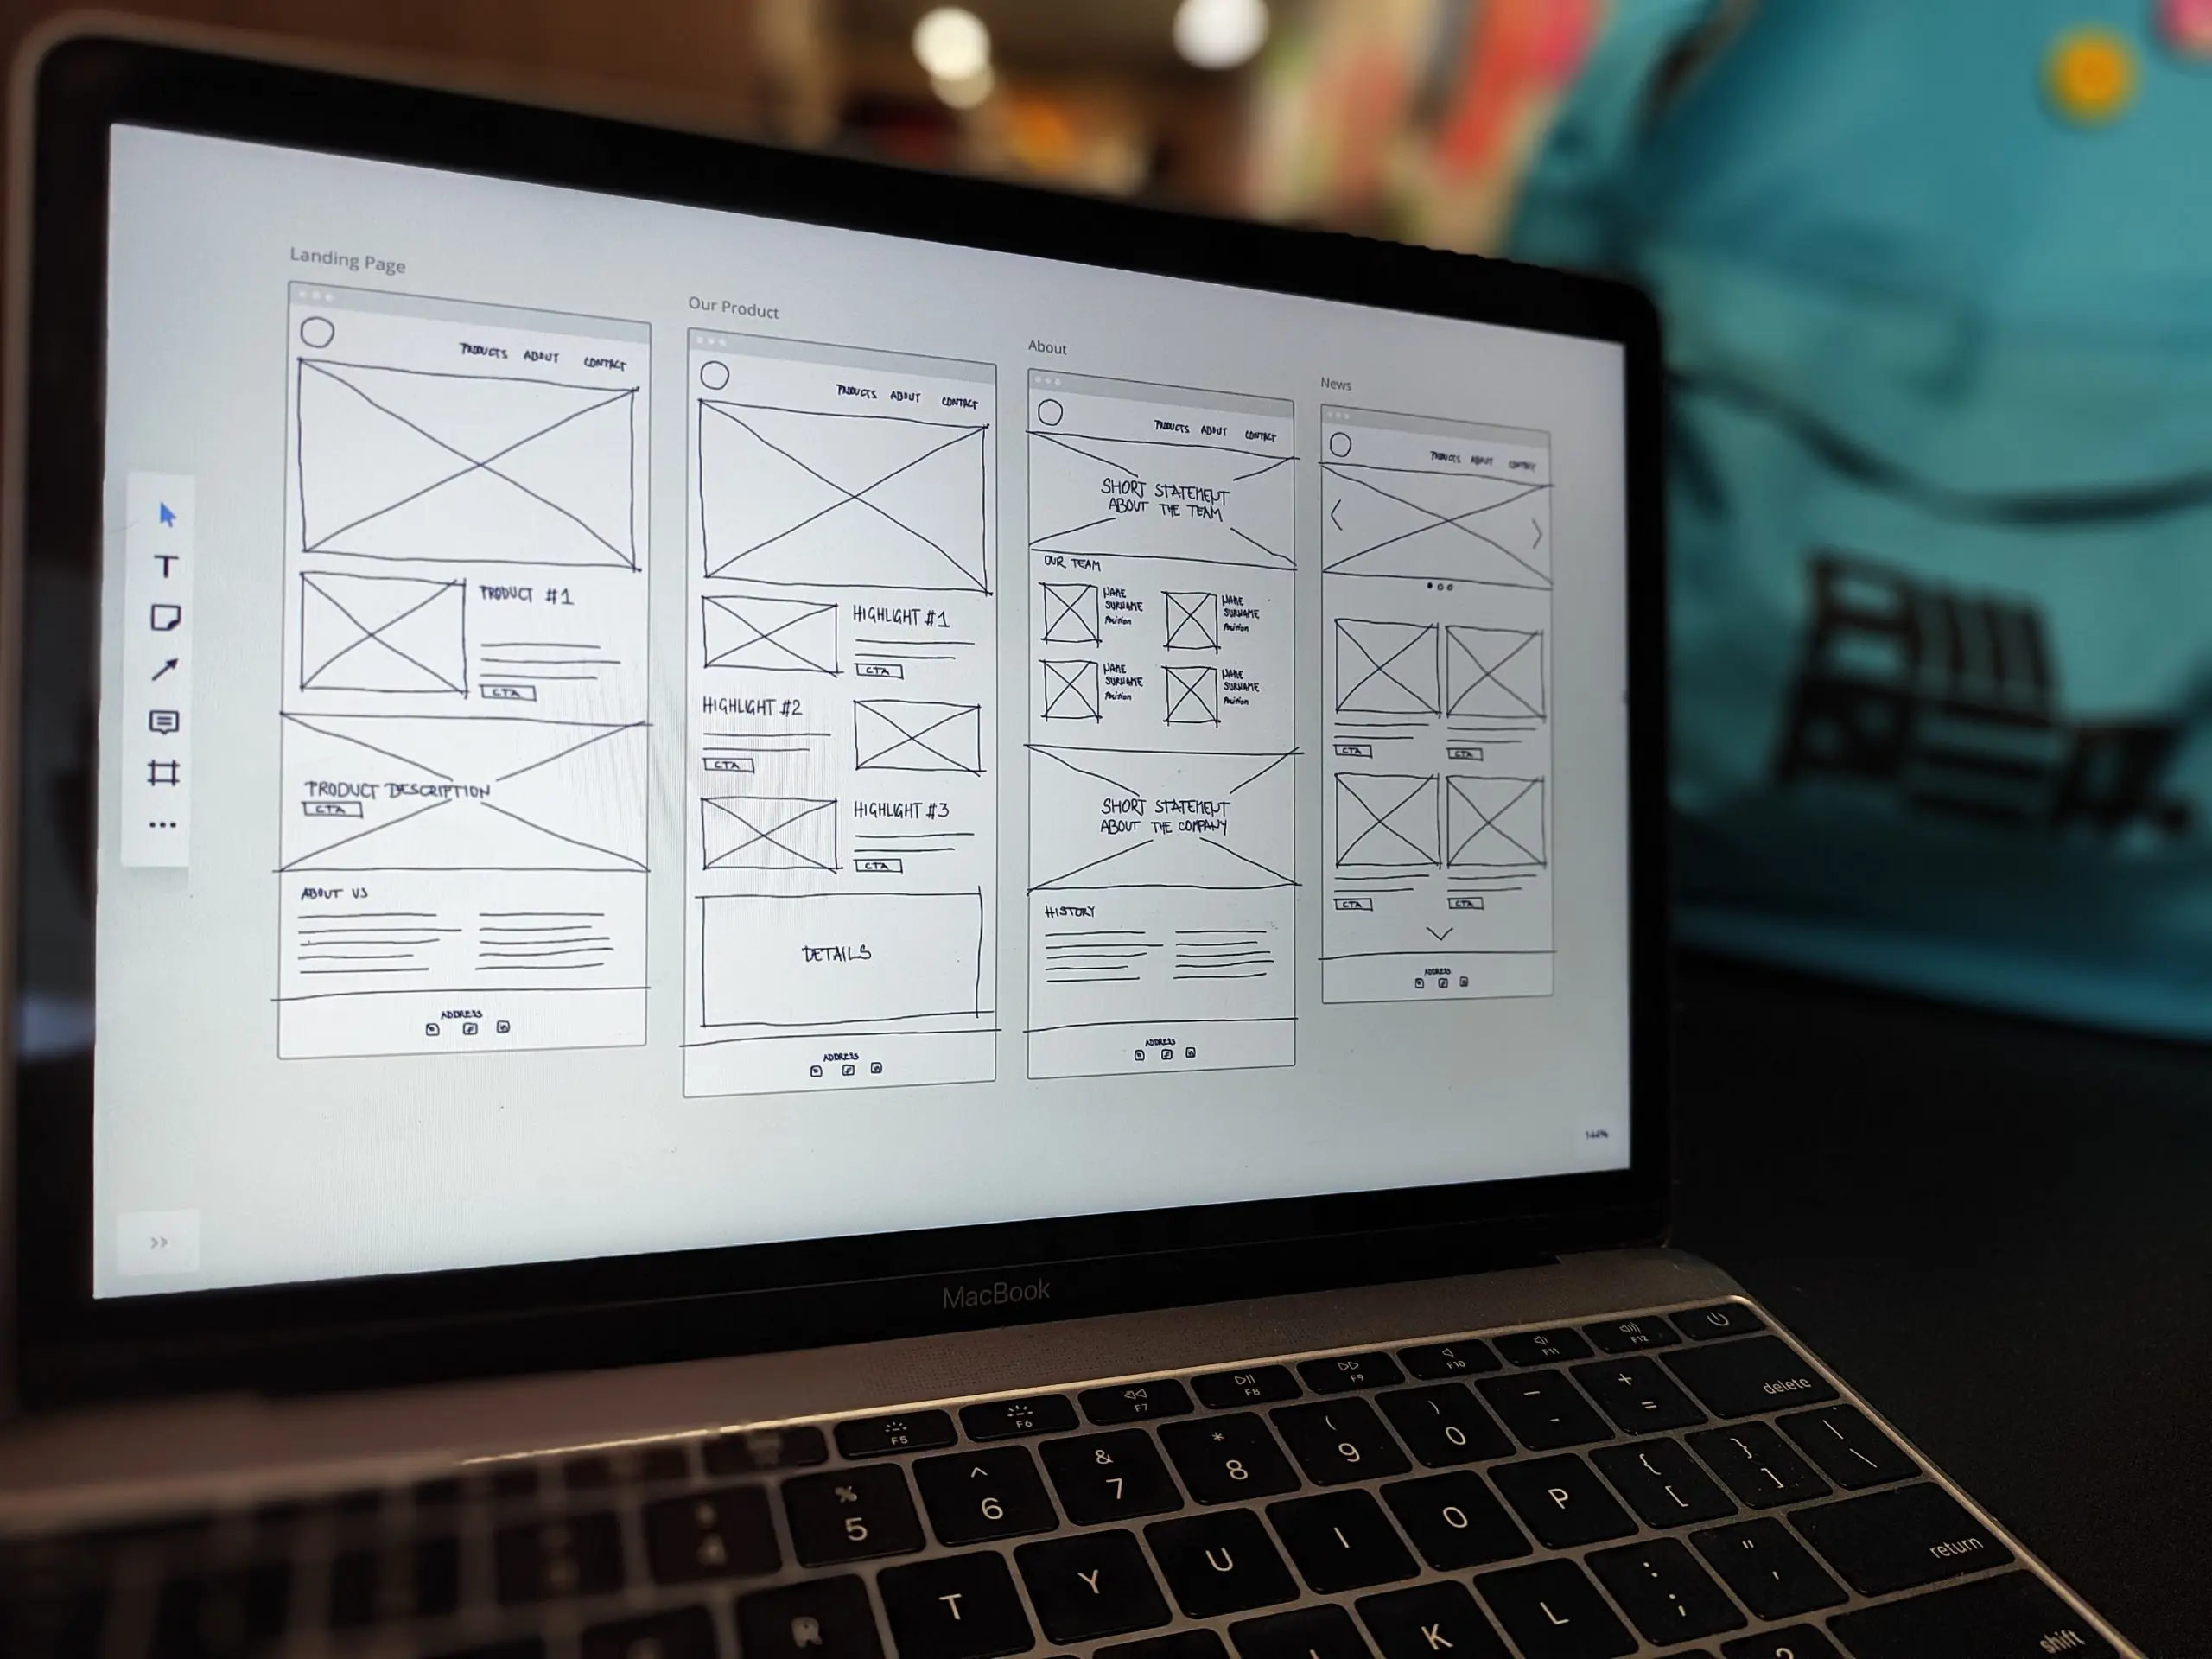 Laptop screen with wireframe